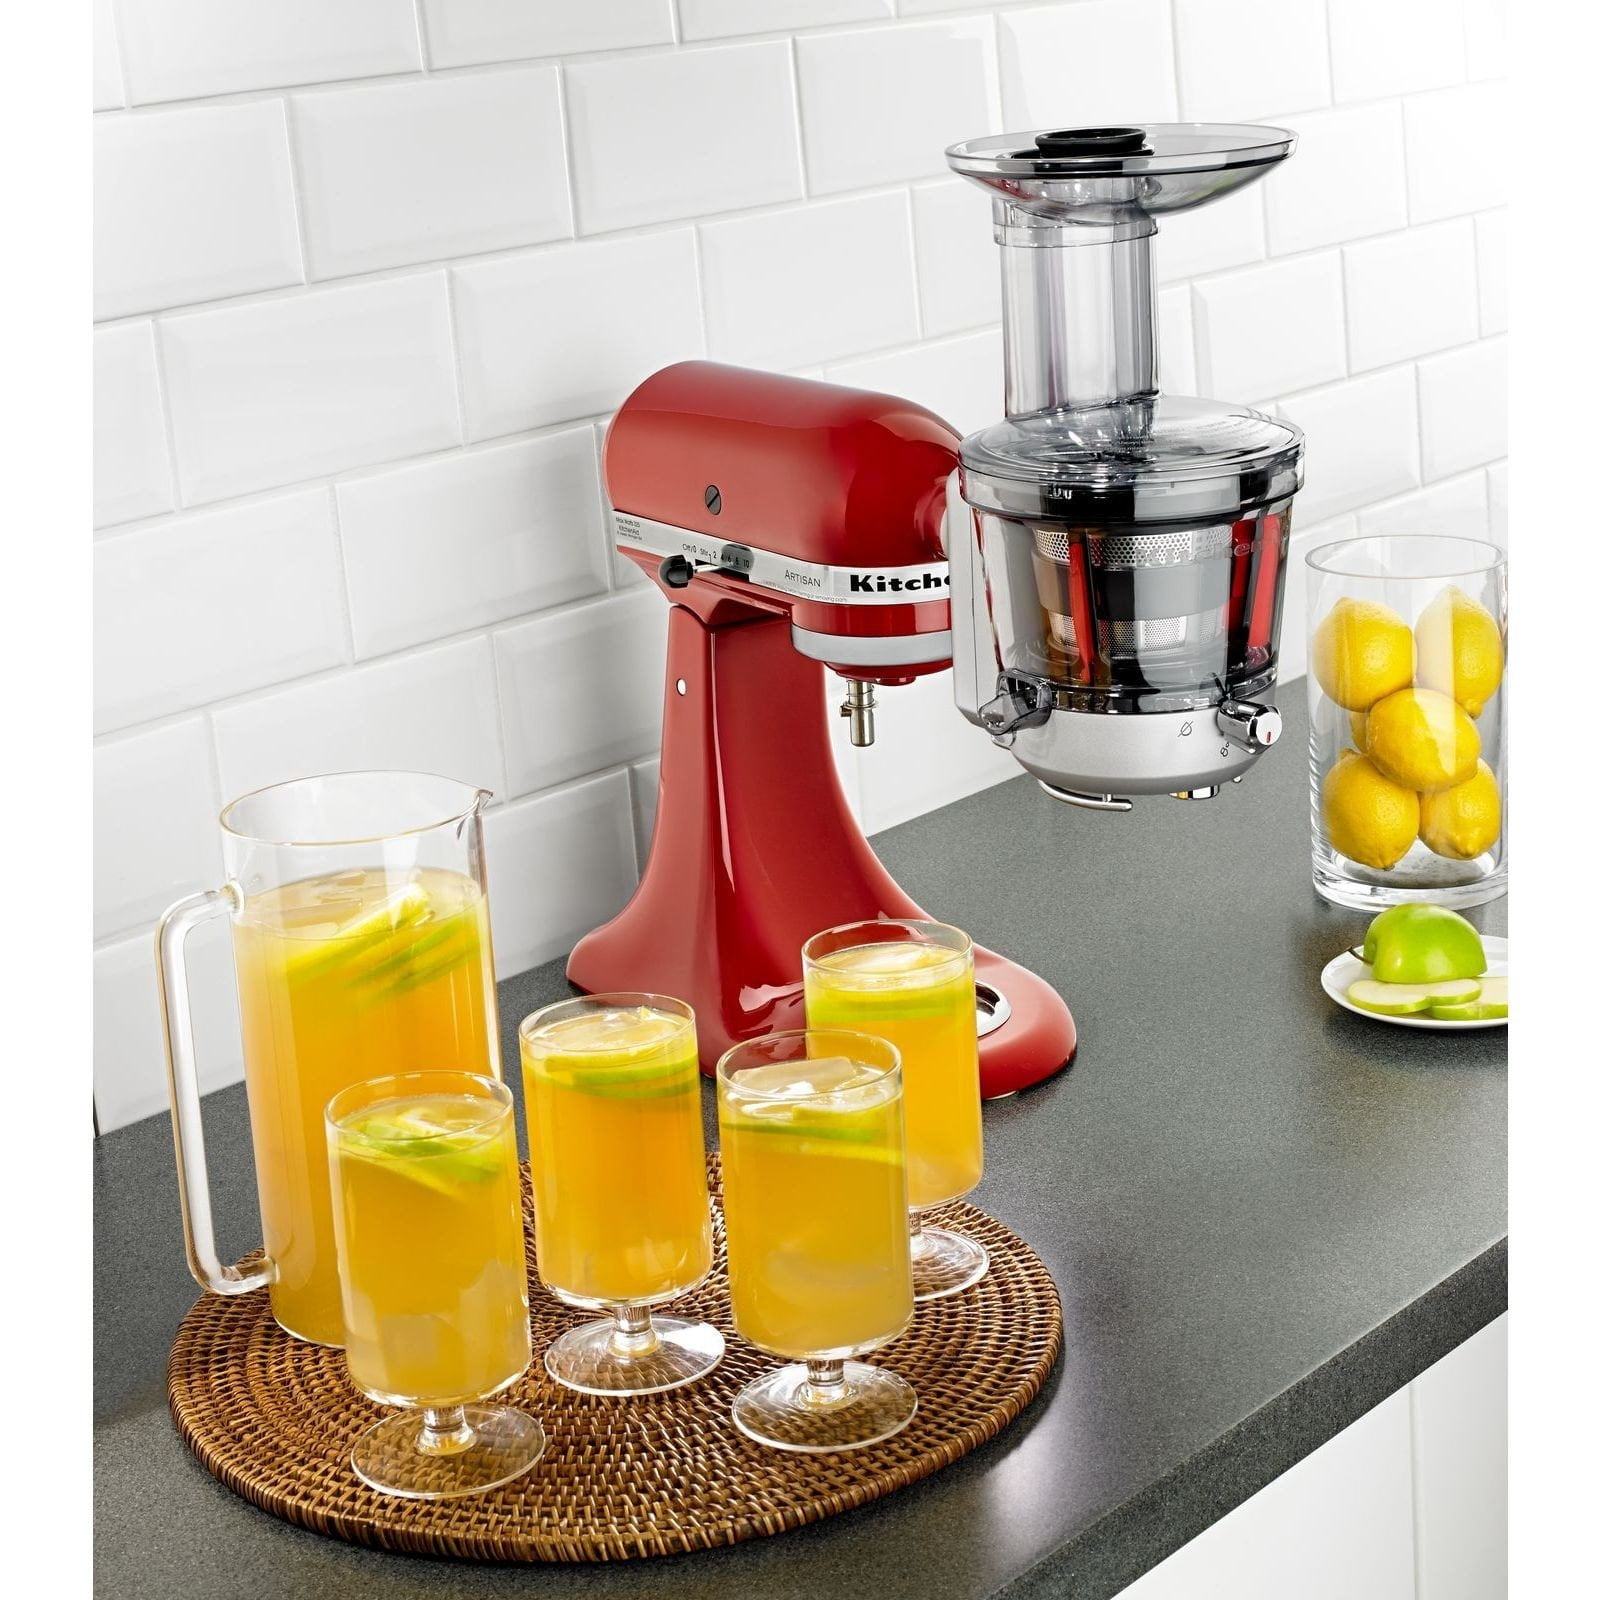 KitchenAid Kenya - Slow juicer attachment for the mixer. Thorough, quality  yield for juice, purée, jam, coulis. Two-stage slow juicing technology with  stainless steel pre-slicing blade and auger assembly 2-in-1 extra wide